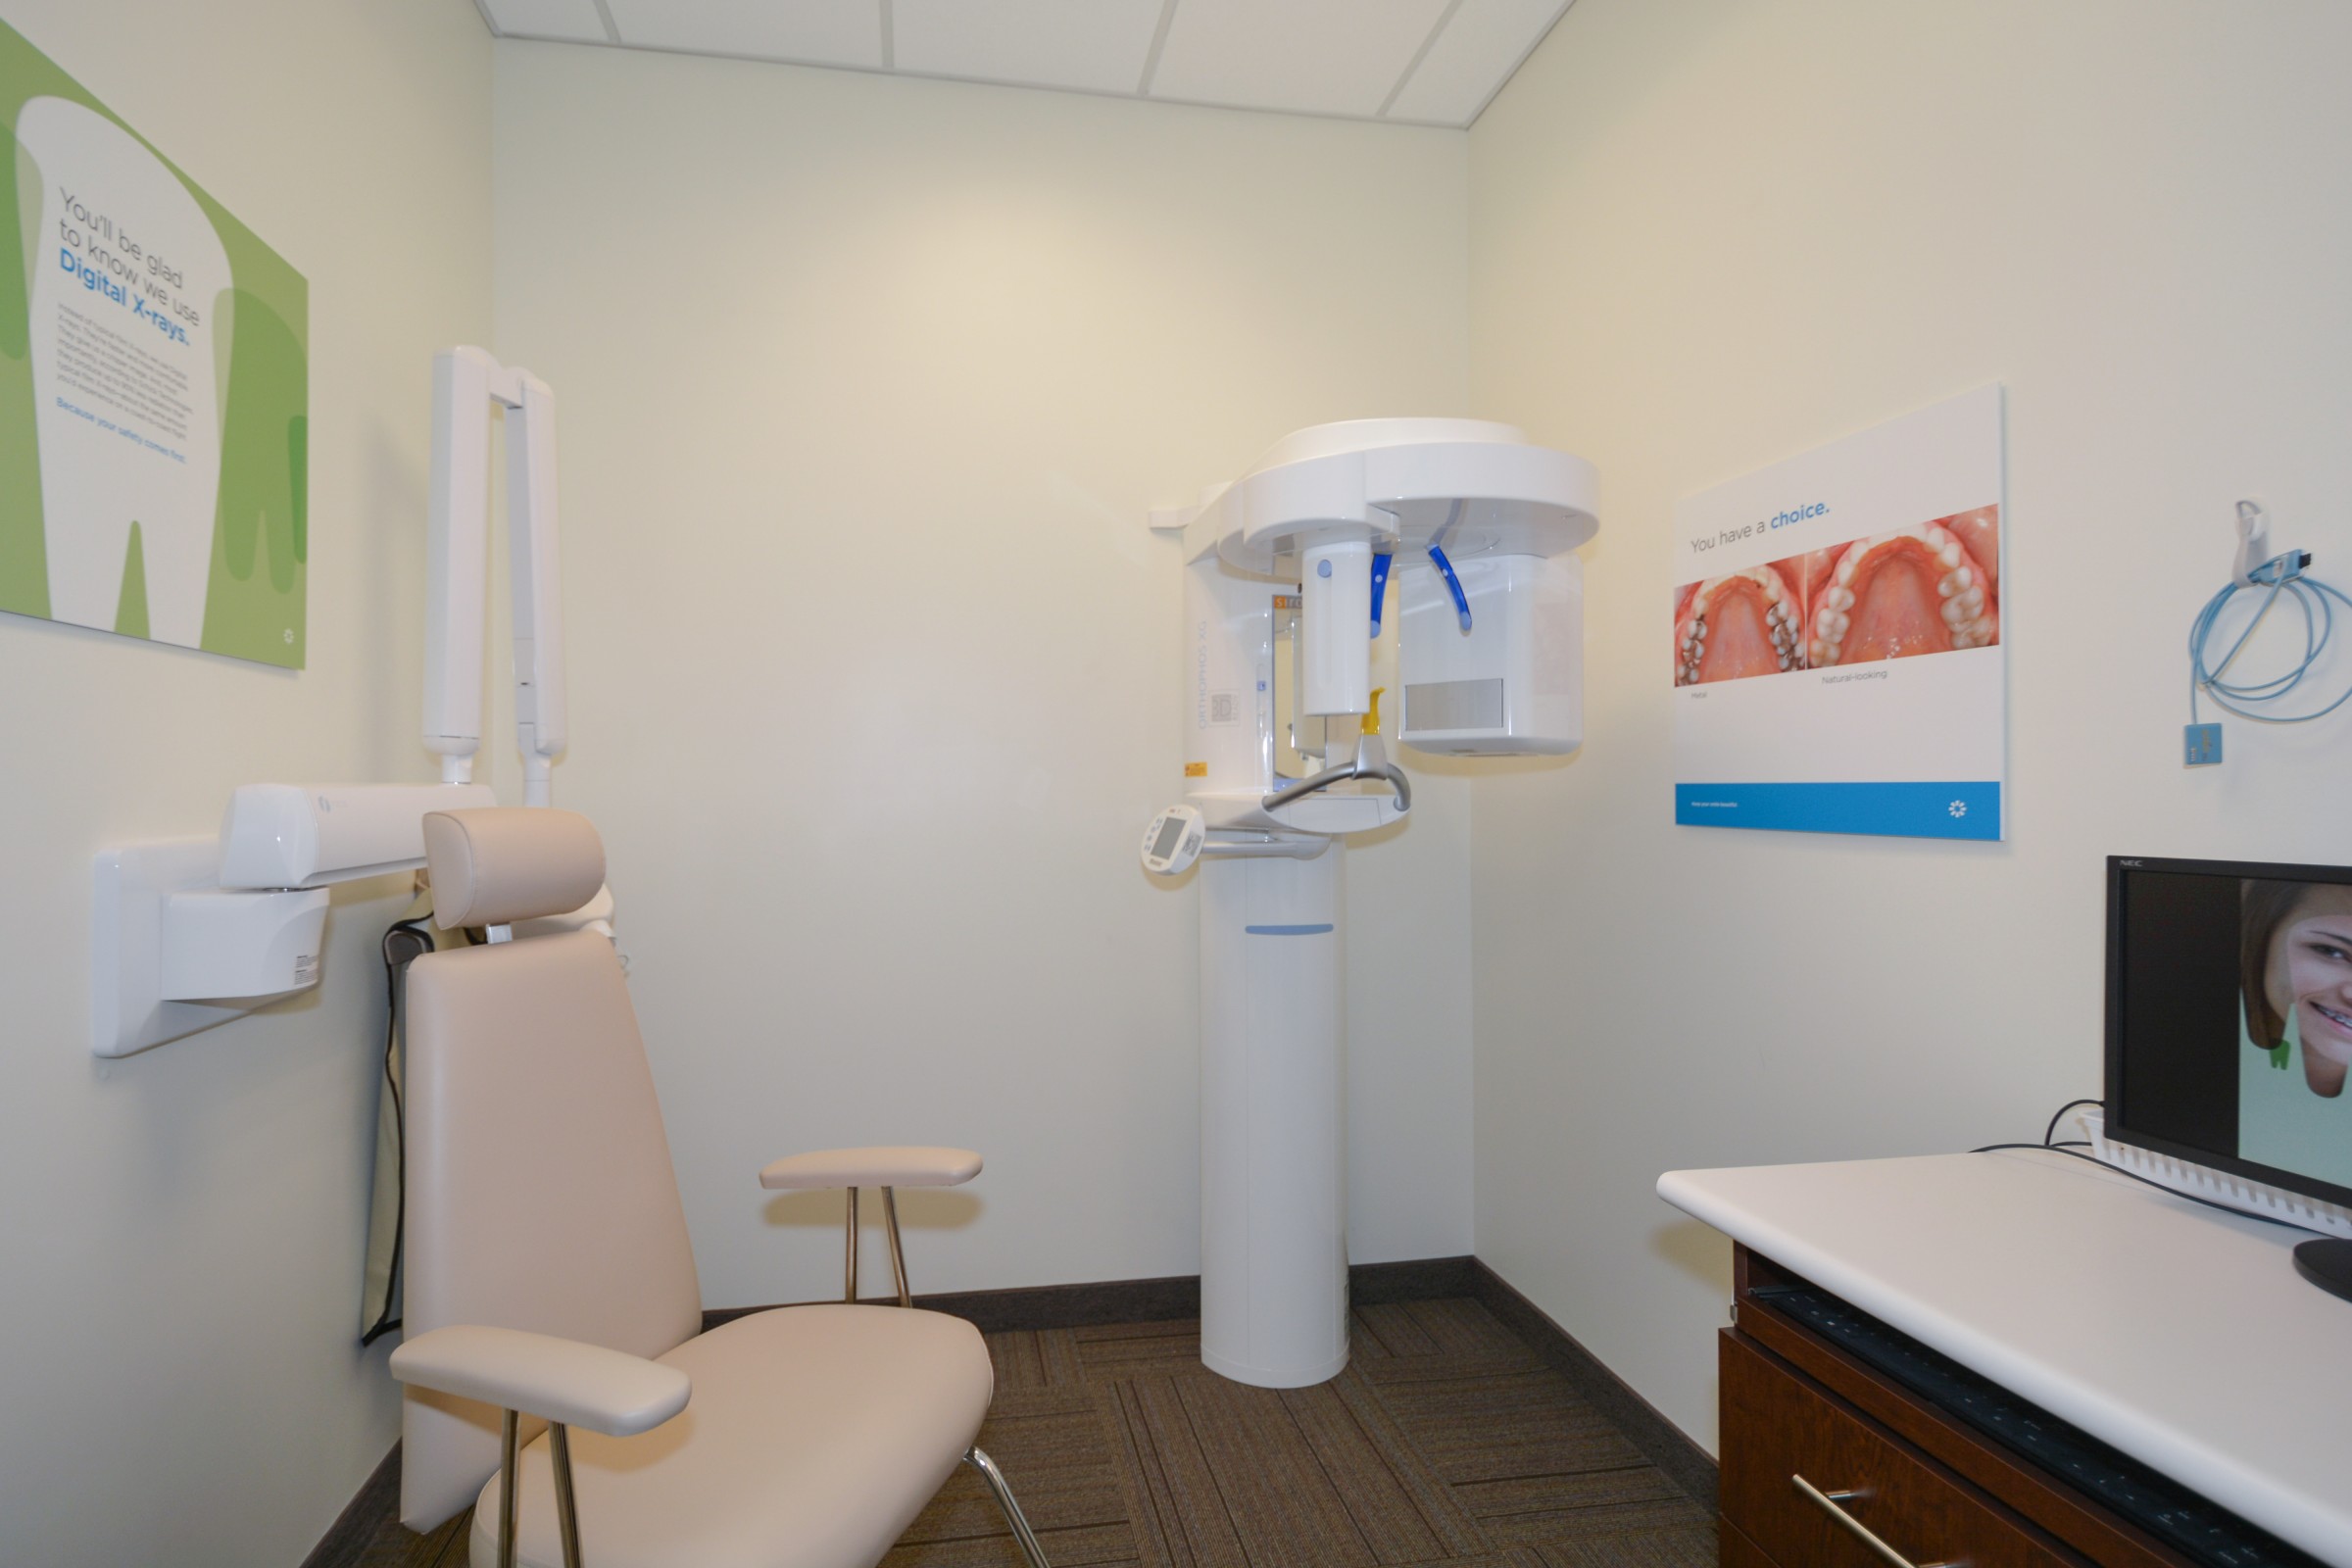 Digital X-rays offer a huge advantage in early detection and preventive services. Weston Modern Dentistry Weston (954)248-2895